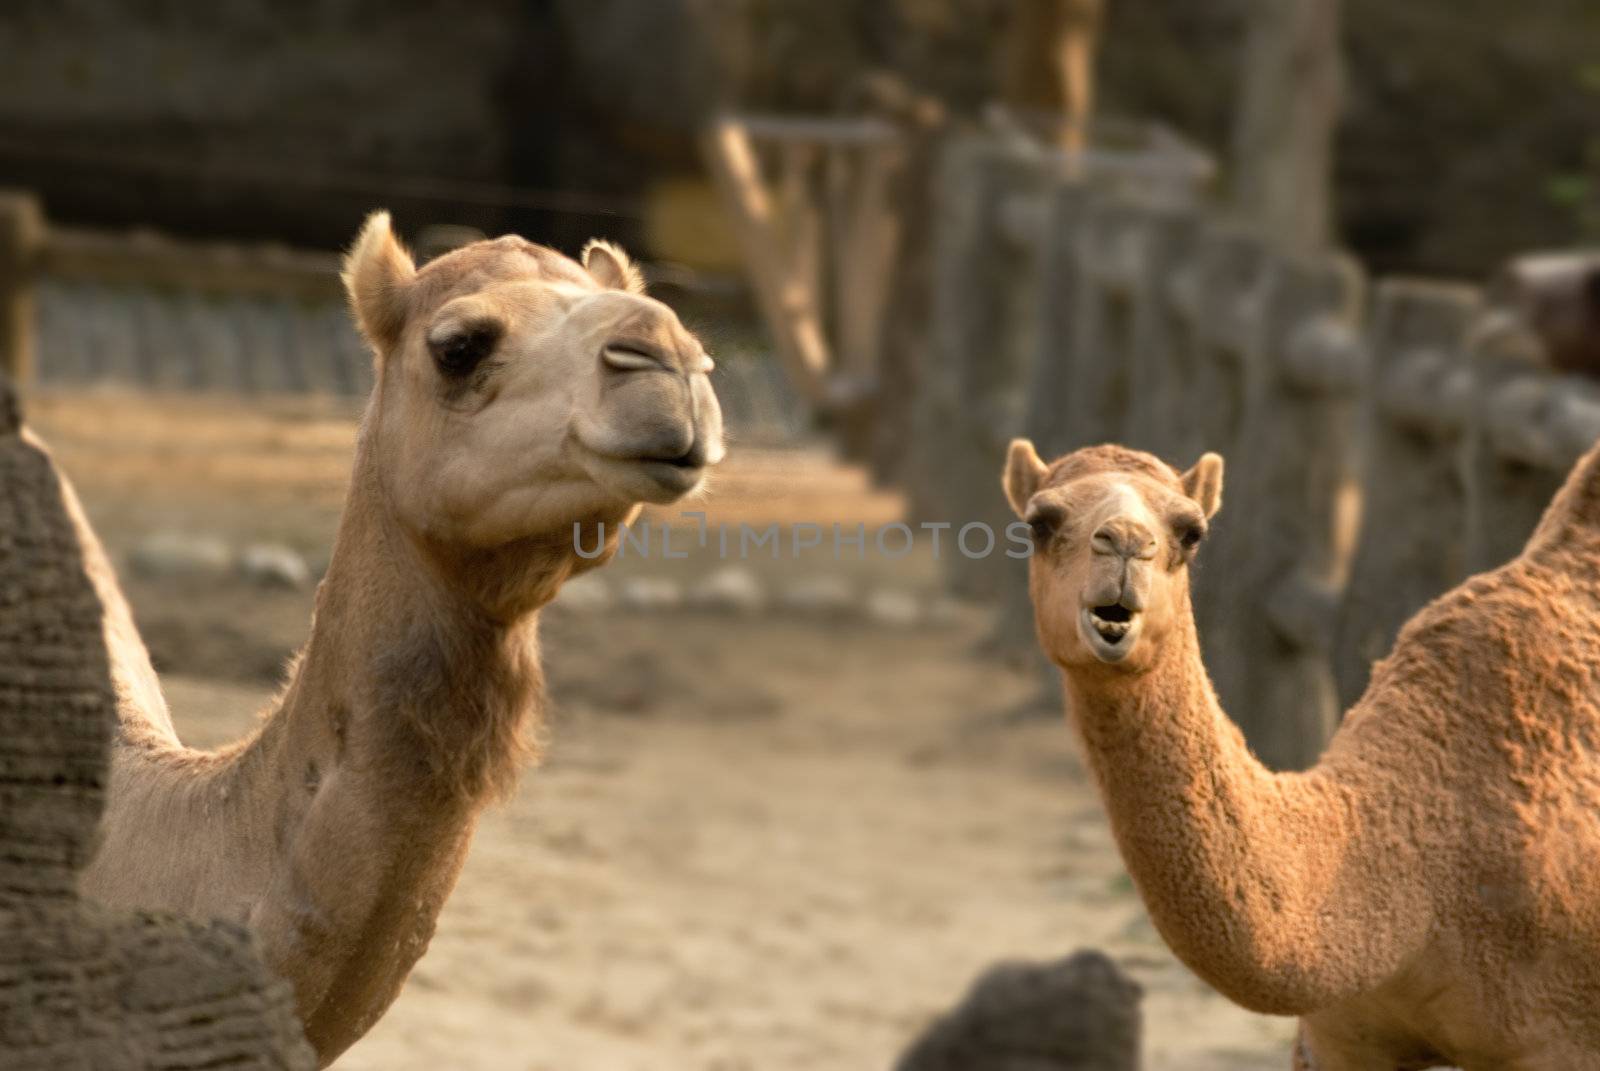 Camels are kind of animal lived in desert. These couple seemed saying something.